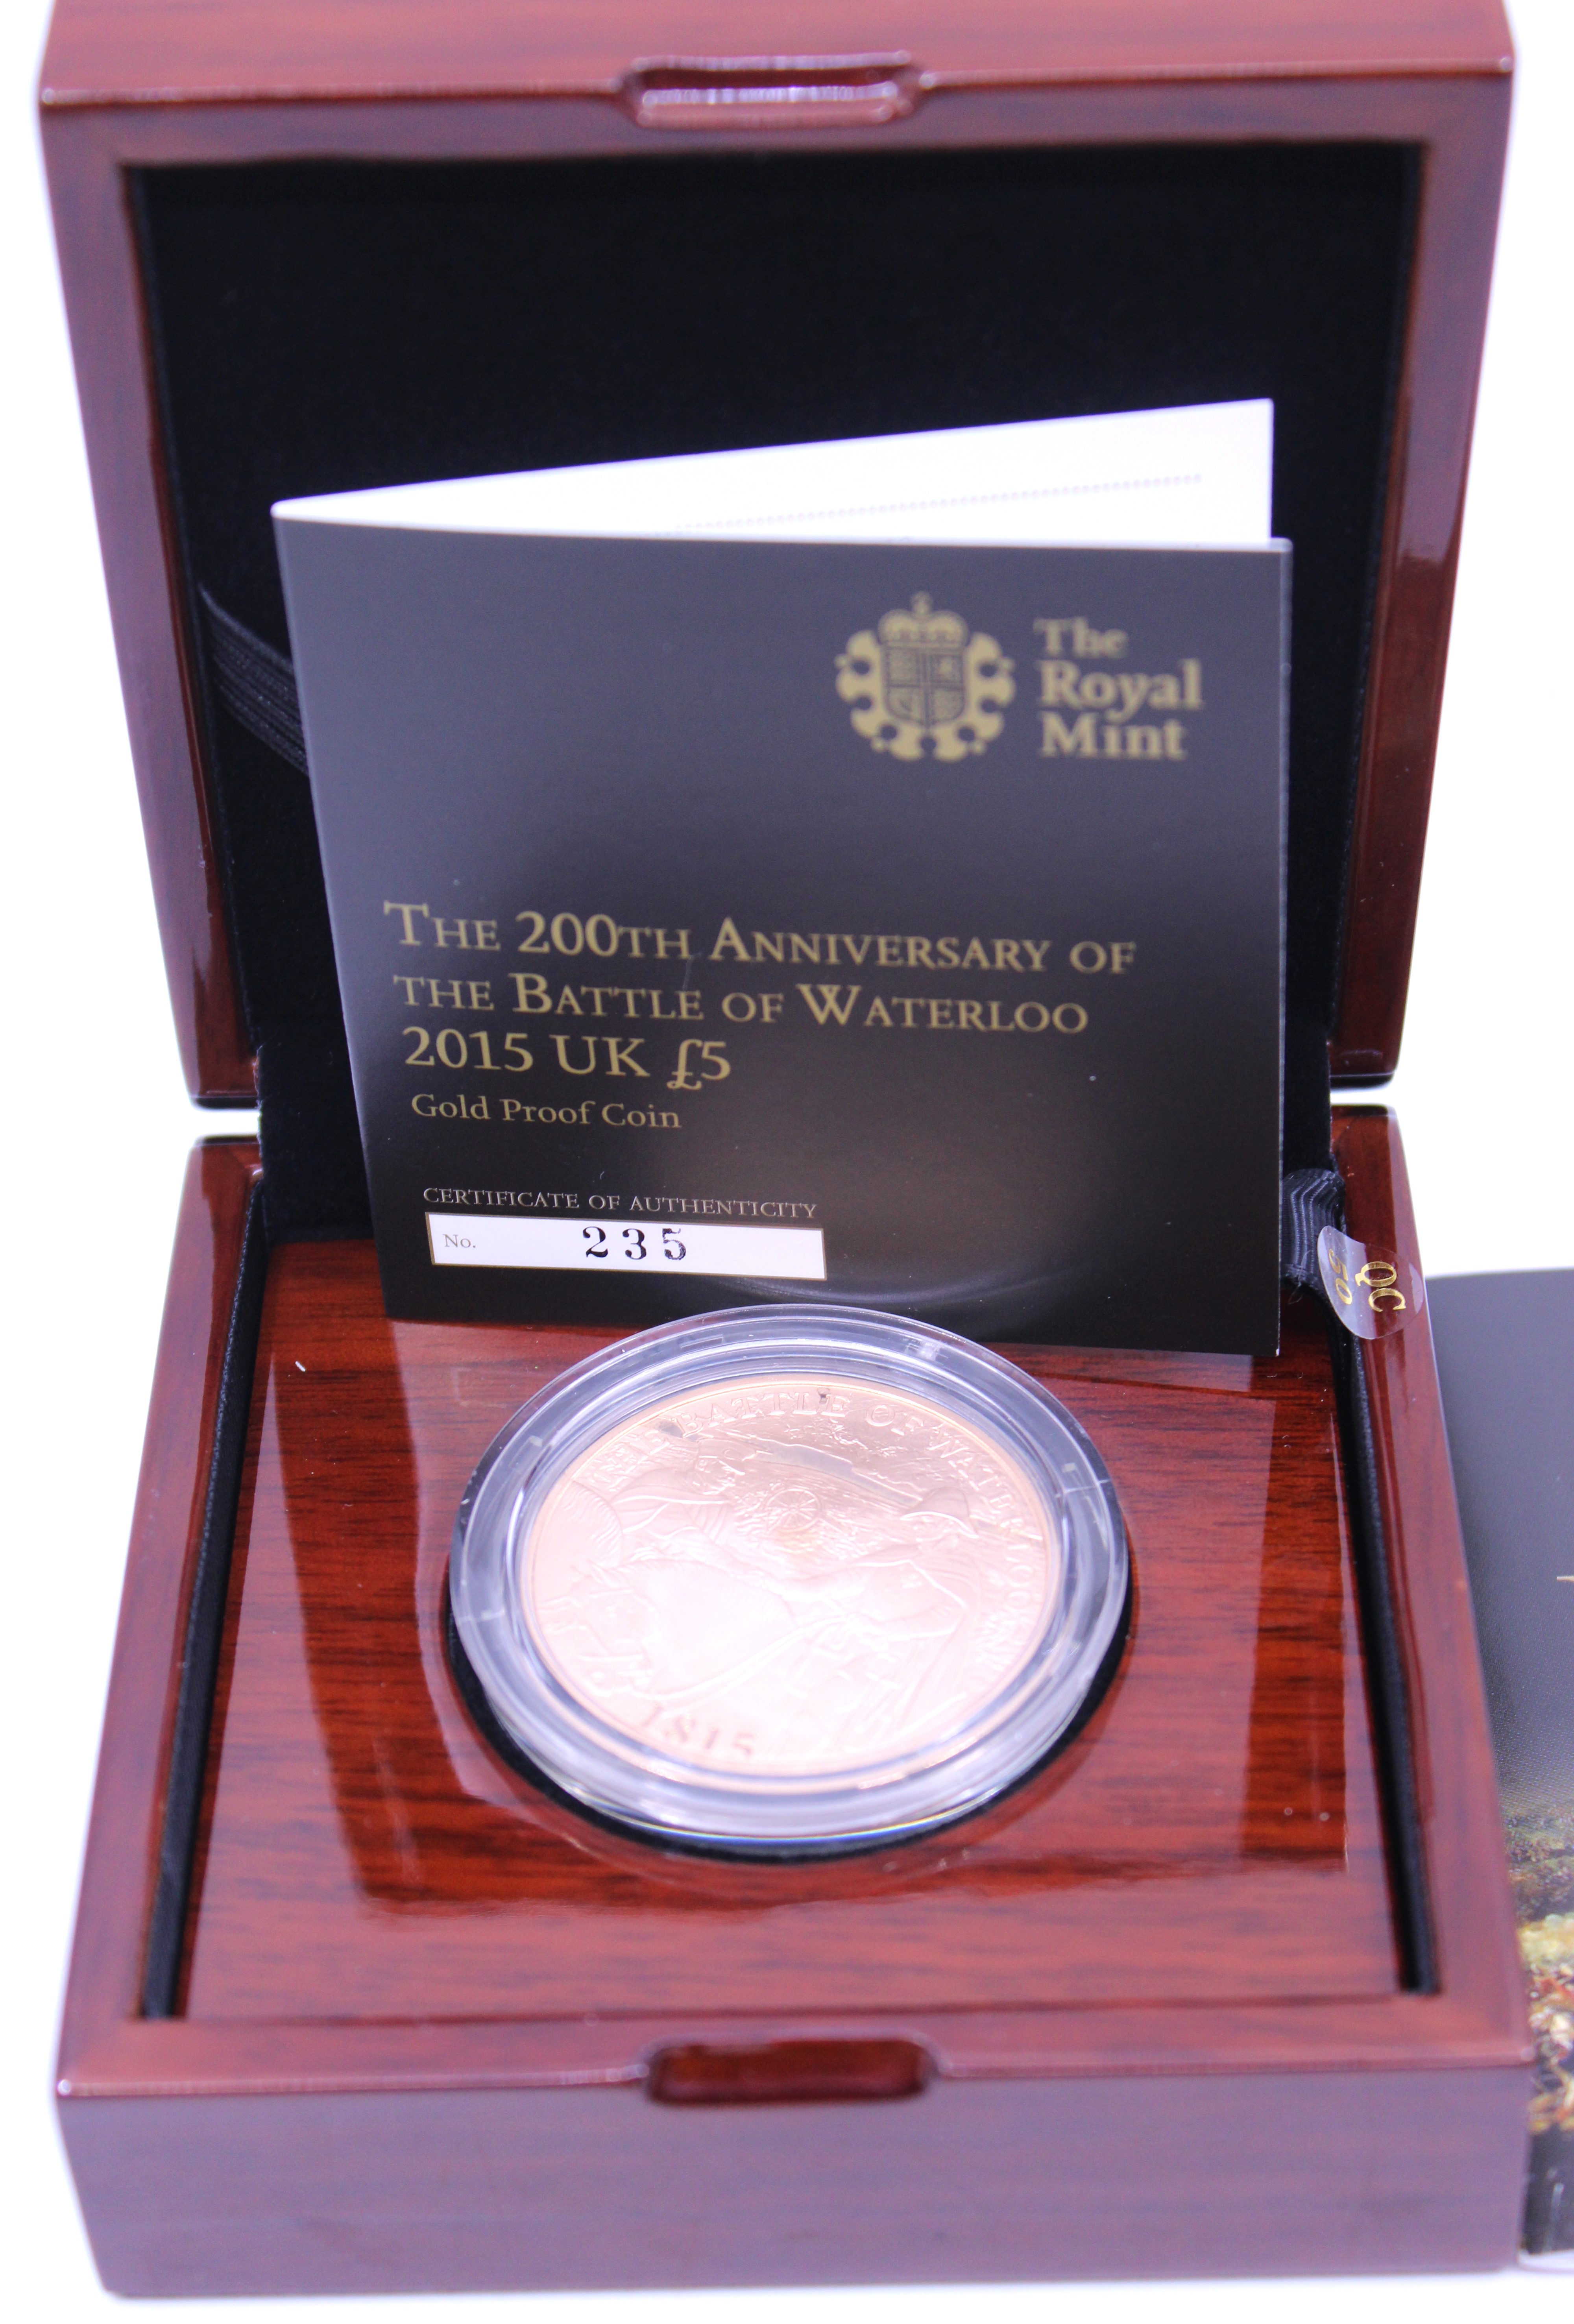 The Royal Mint The 200th Anniversary of the Battle of Waterloo 2015 UK £5 Gold Proof Coin. Boxed